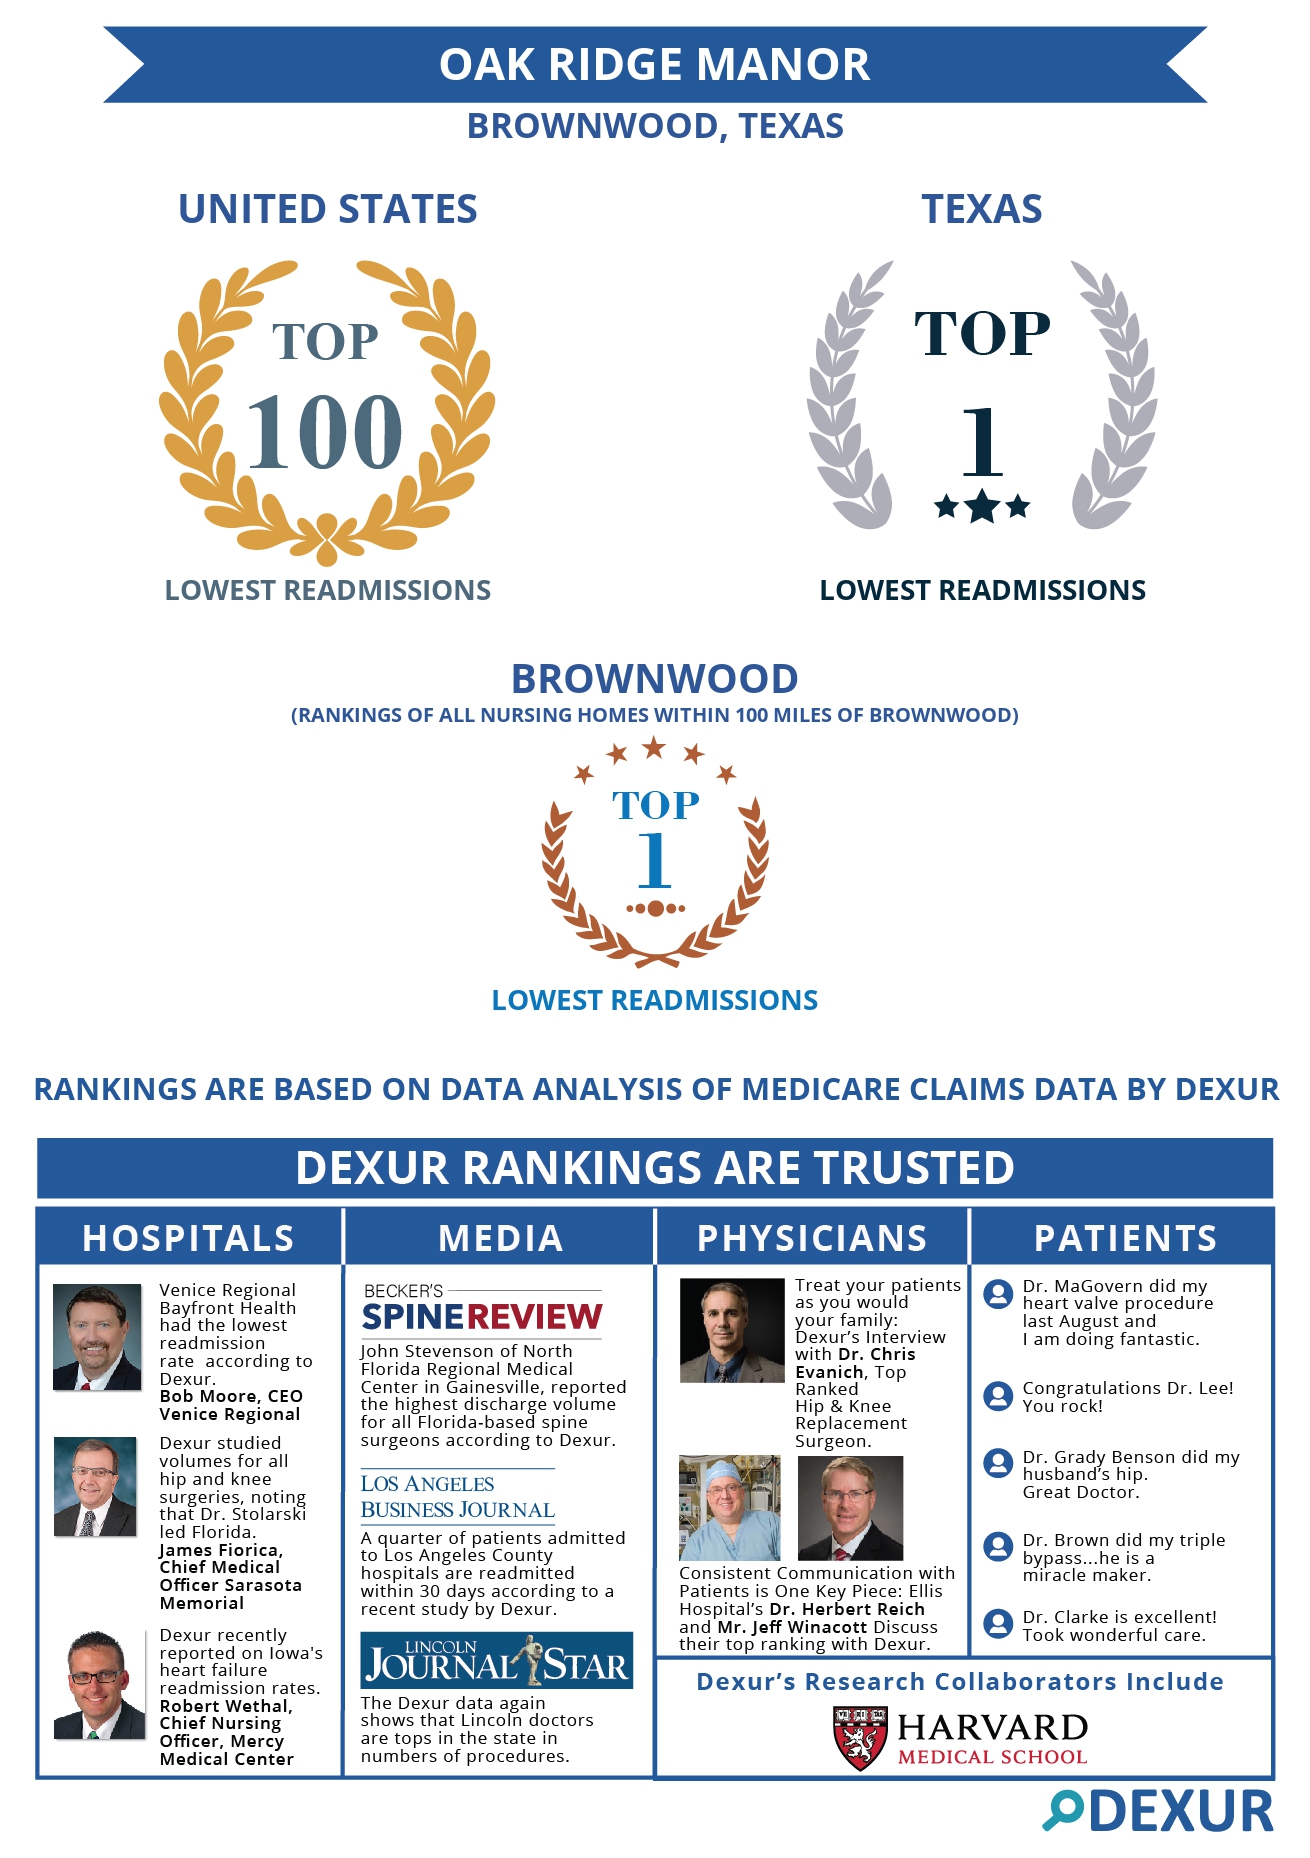 Oak Ridge Manor Is Among The Top Ranked Nursing Homes Within 100 Miles From Brownwood Tx Based On Hospital Readmission Rates